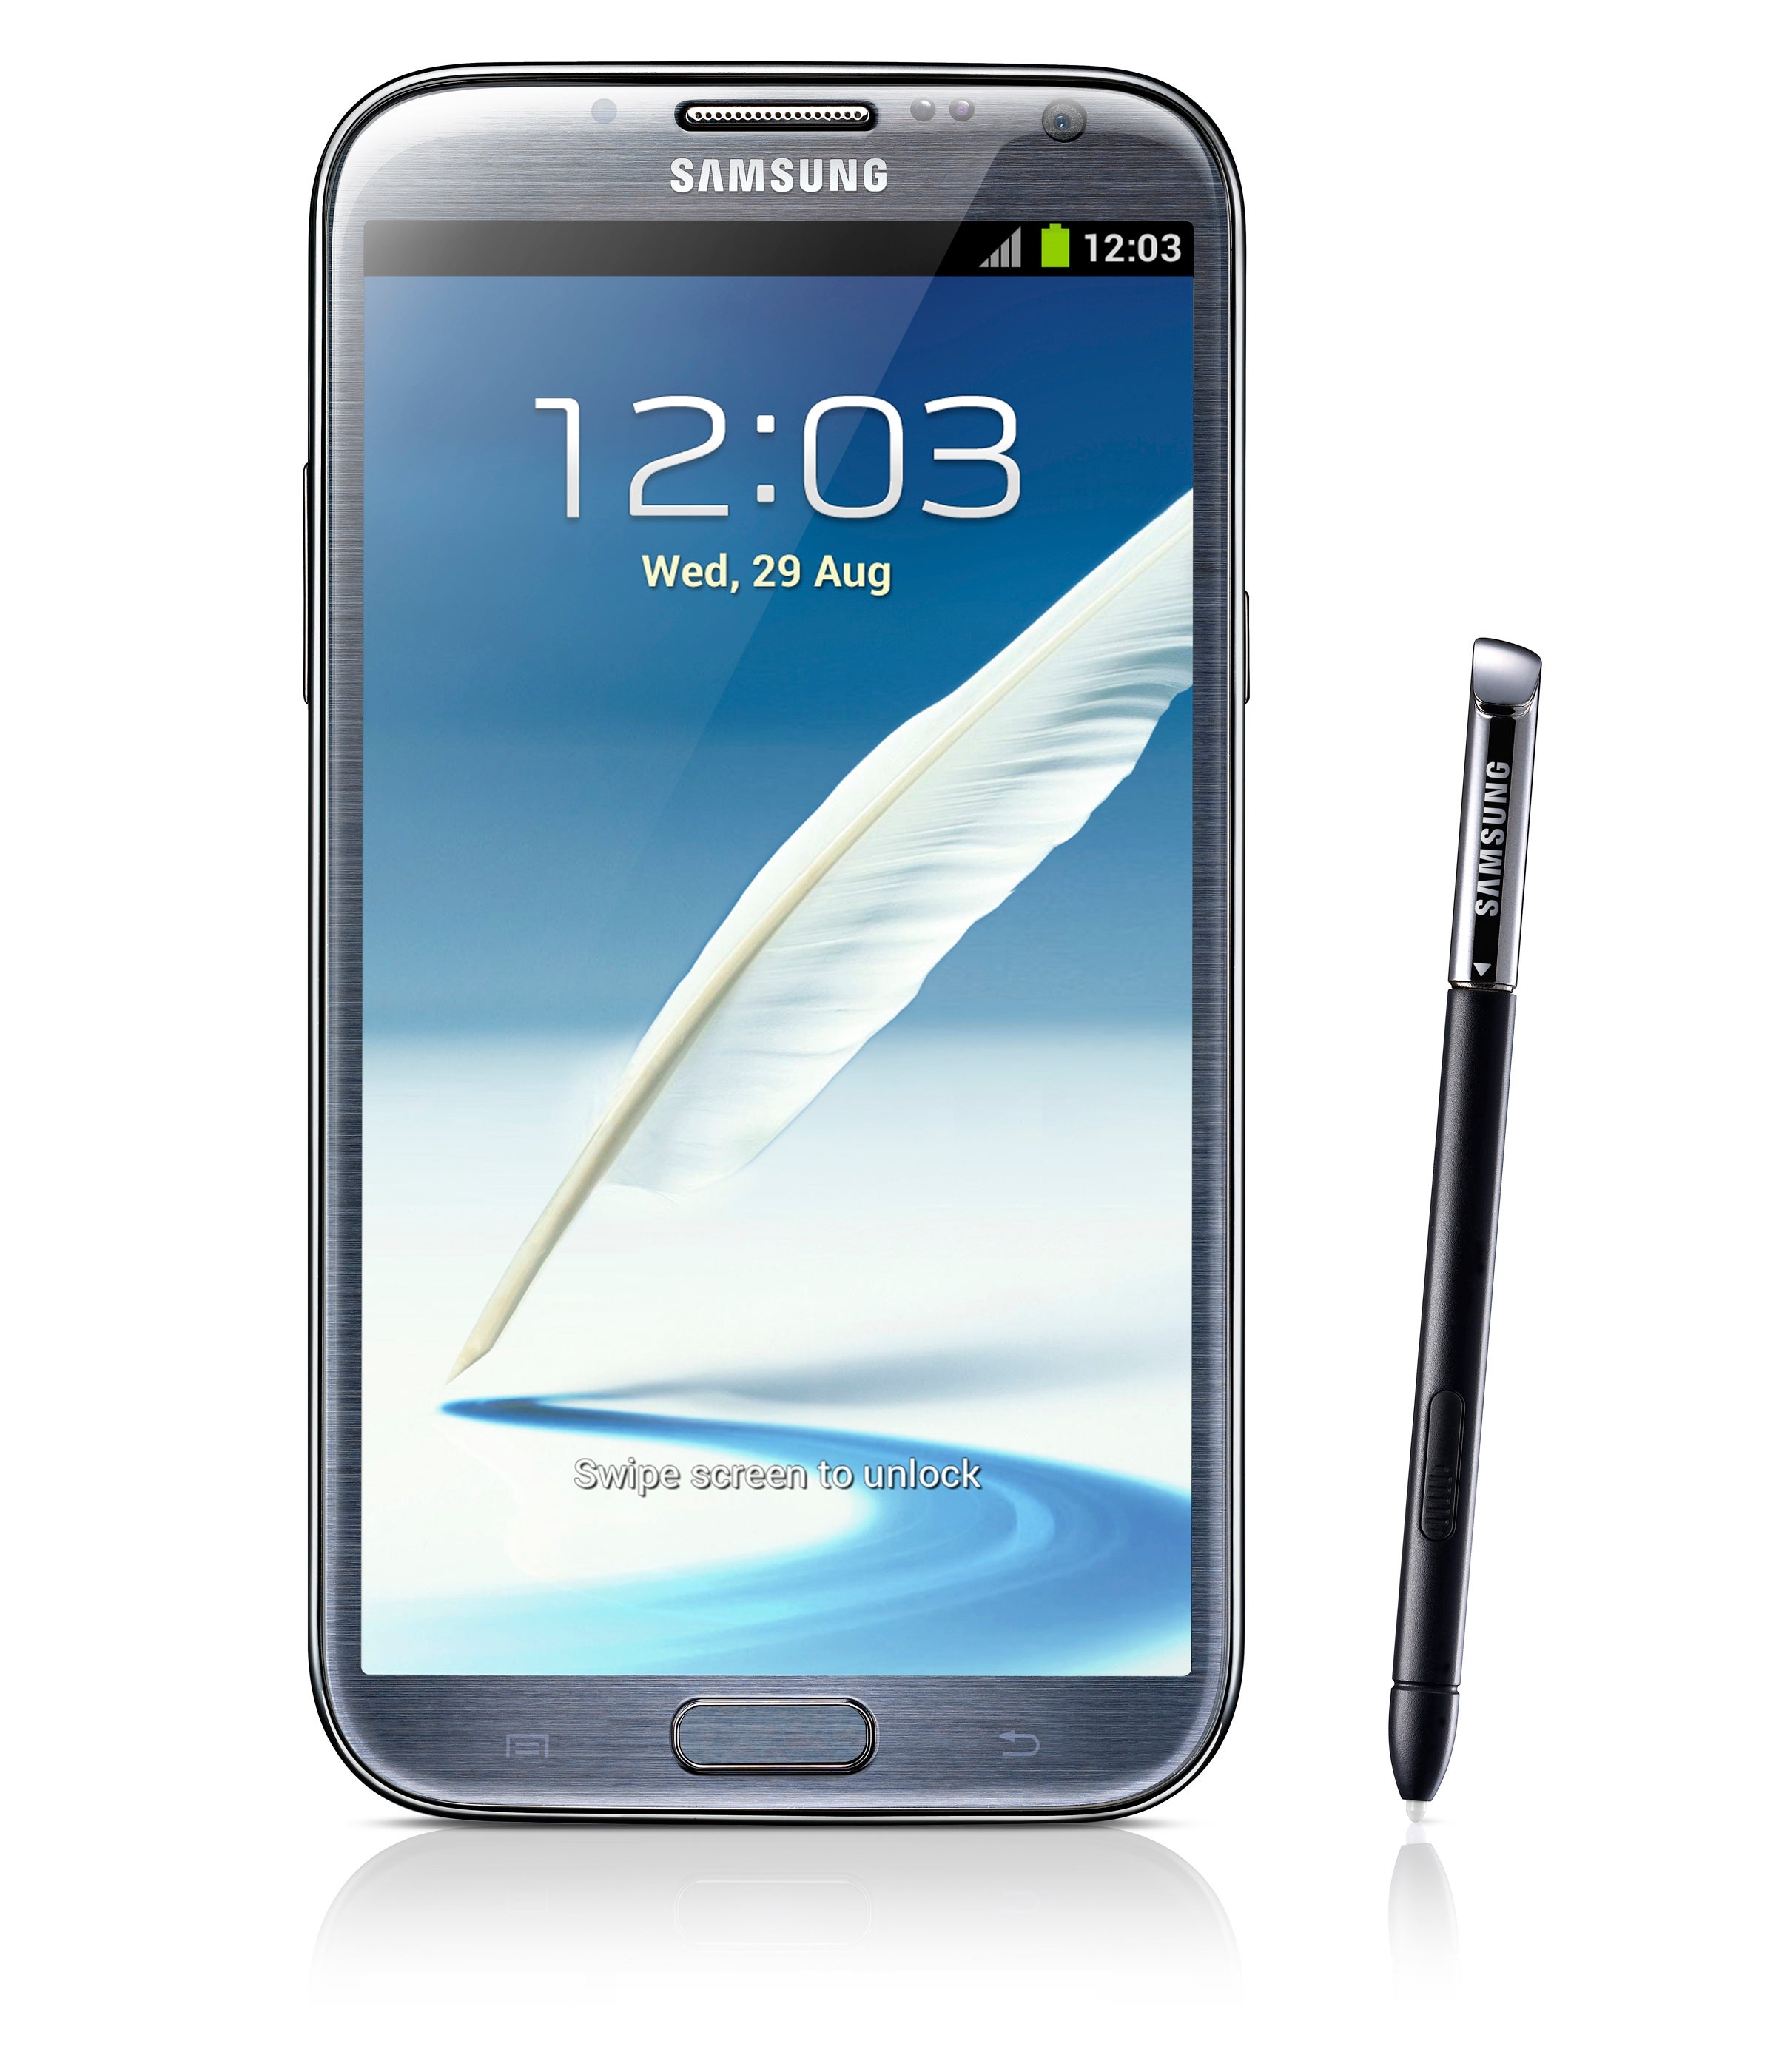 The Samsung GALAXY Note II - Accessories for Samsung GALAXY Note II make rainbow like appearance at IFA